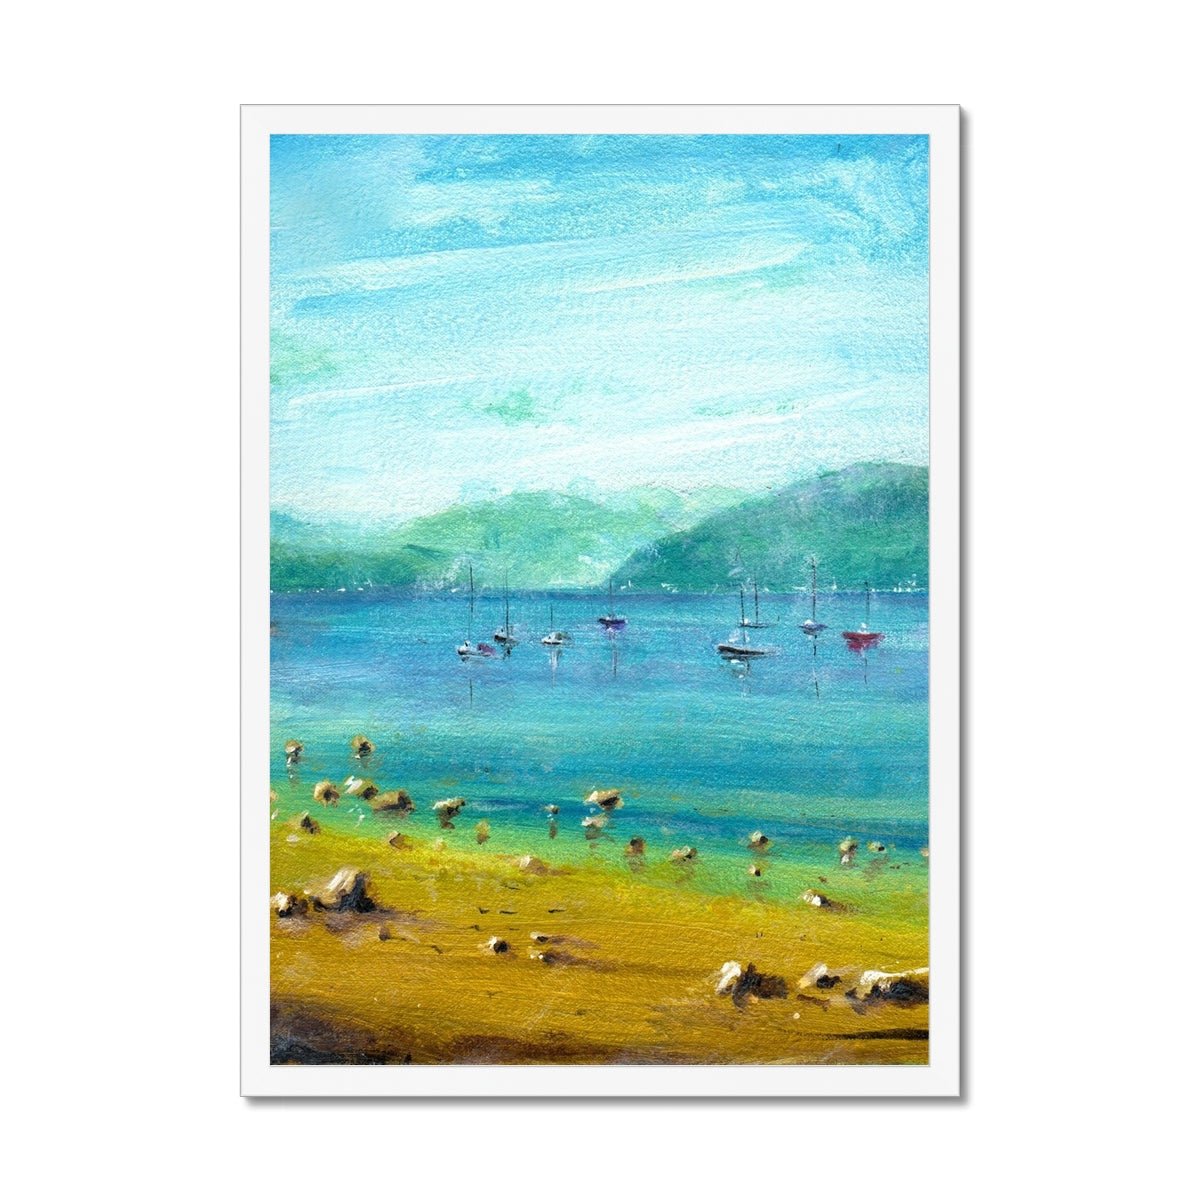 A Summer Day On The Clyde Painting | Framed Prints From Scotland-Framed Prints-River Clyde Art Gallery-A2 Portrait-White Frame-Paintings, Prints, Homeware, Art Gifts From Scotland By Scottish Artist Kevin Hunter